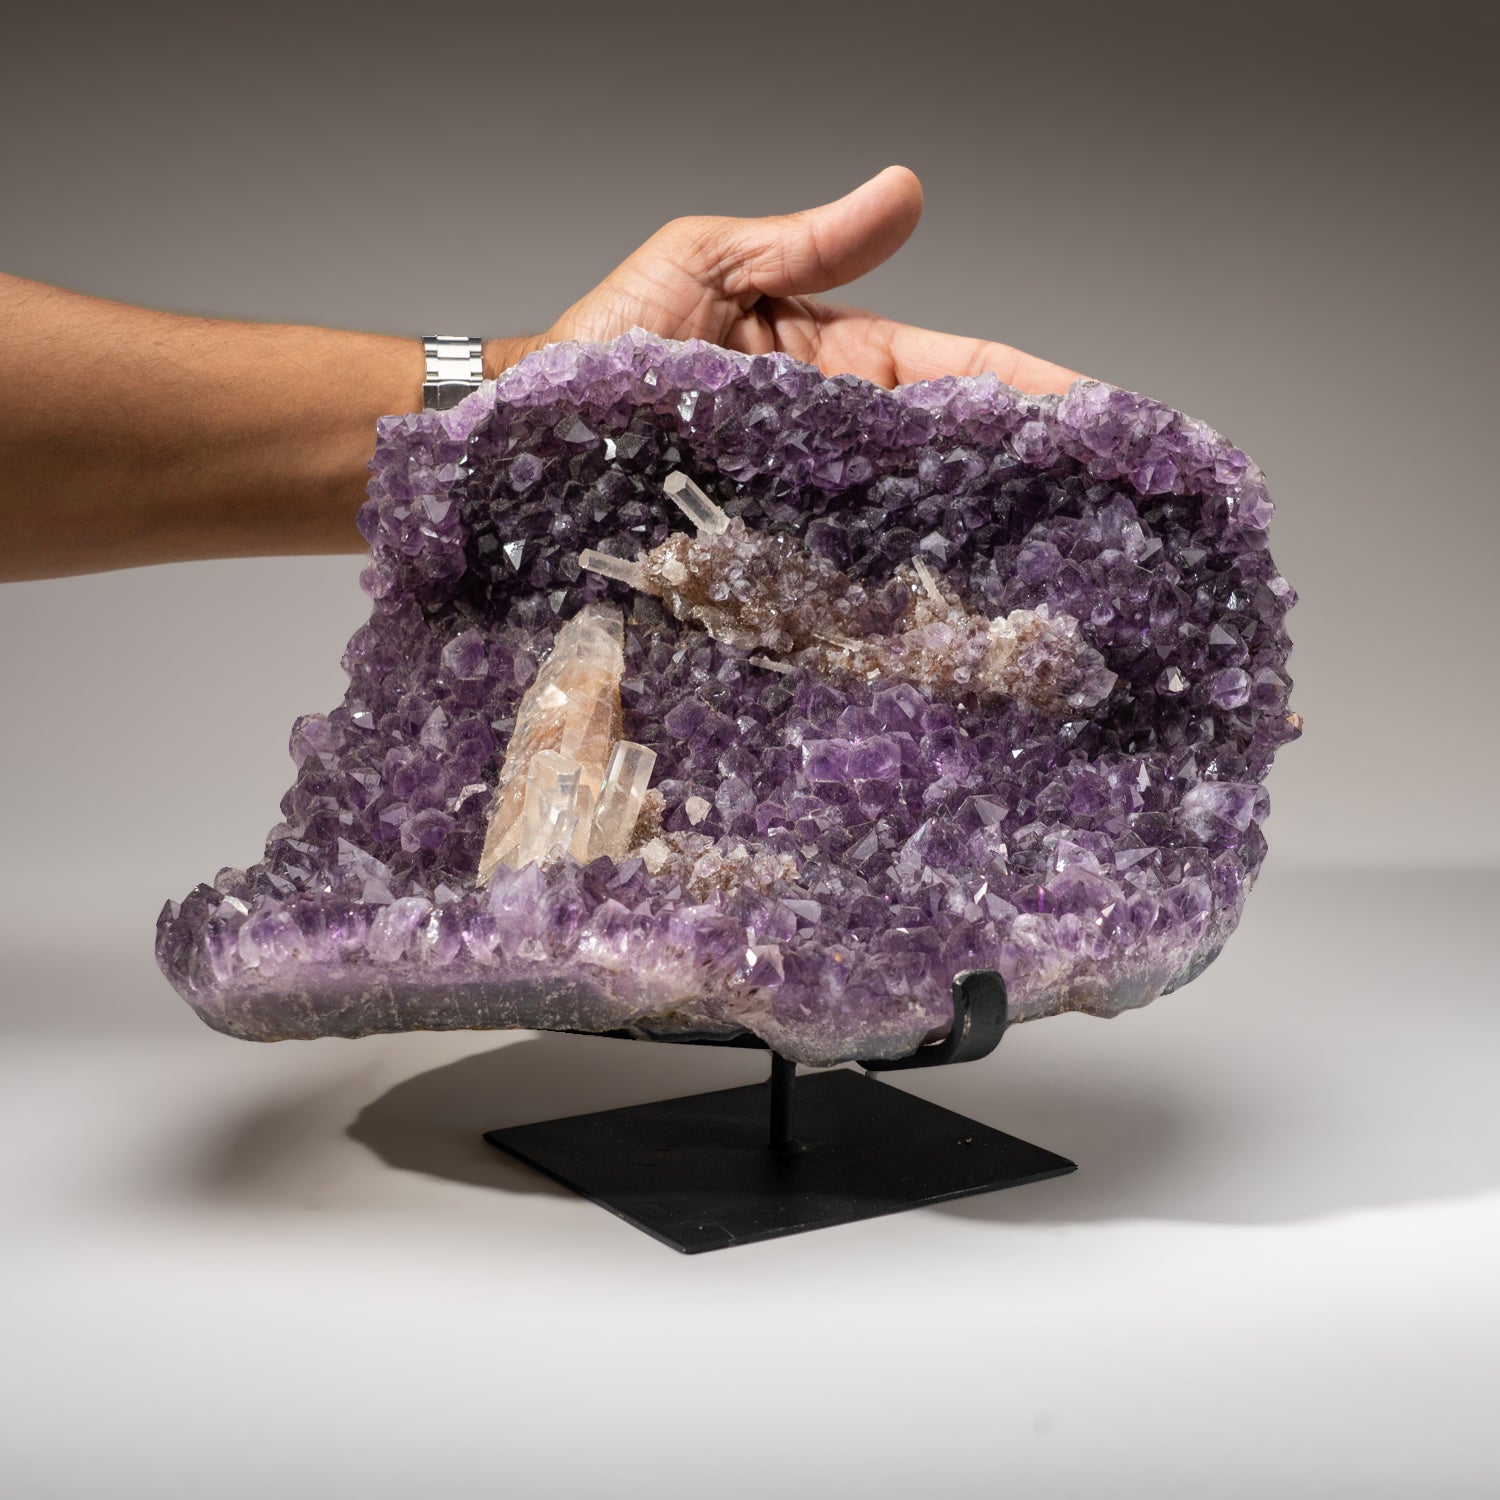 Genuine Amethyst Crystal Cluster with Calcite on Stand from Uruguay (16 lbs)